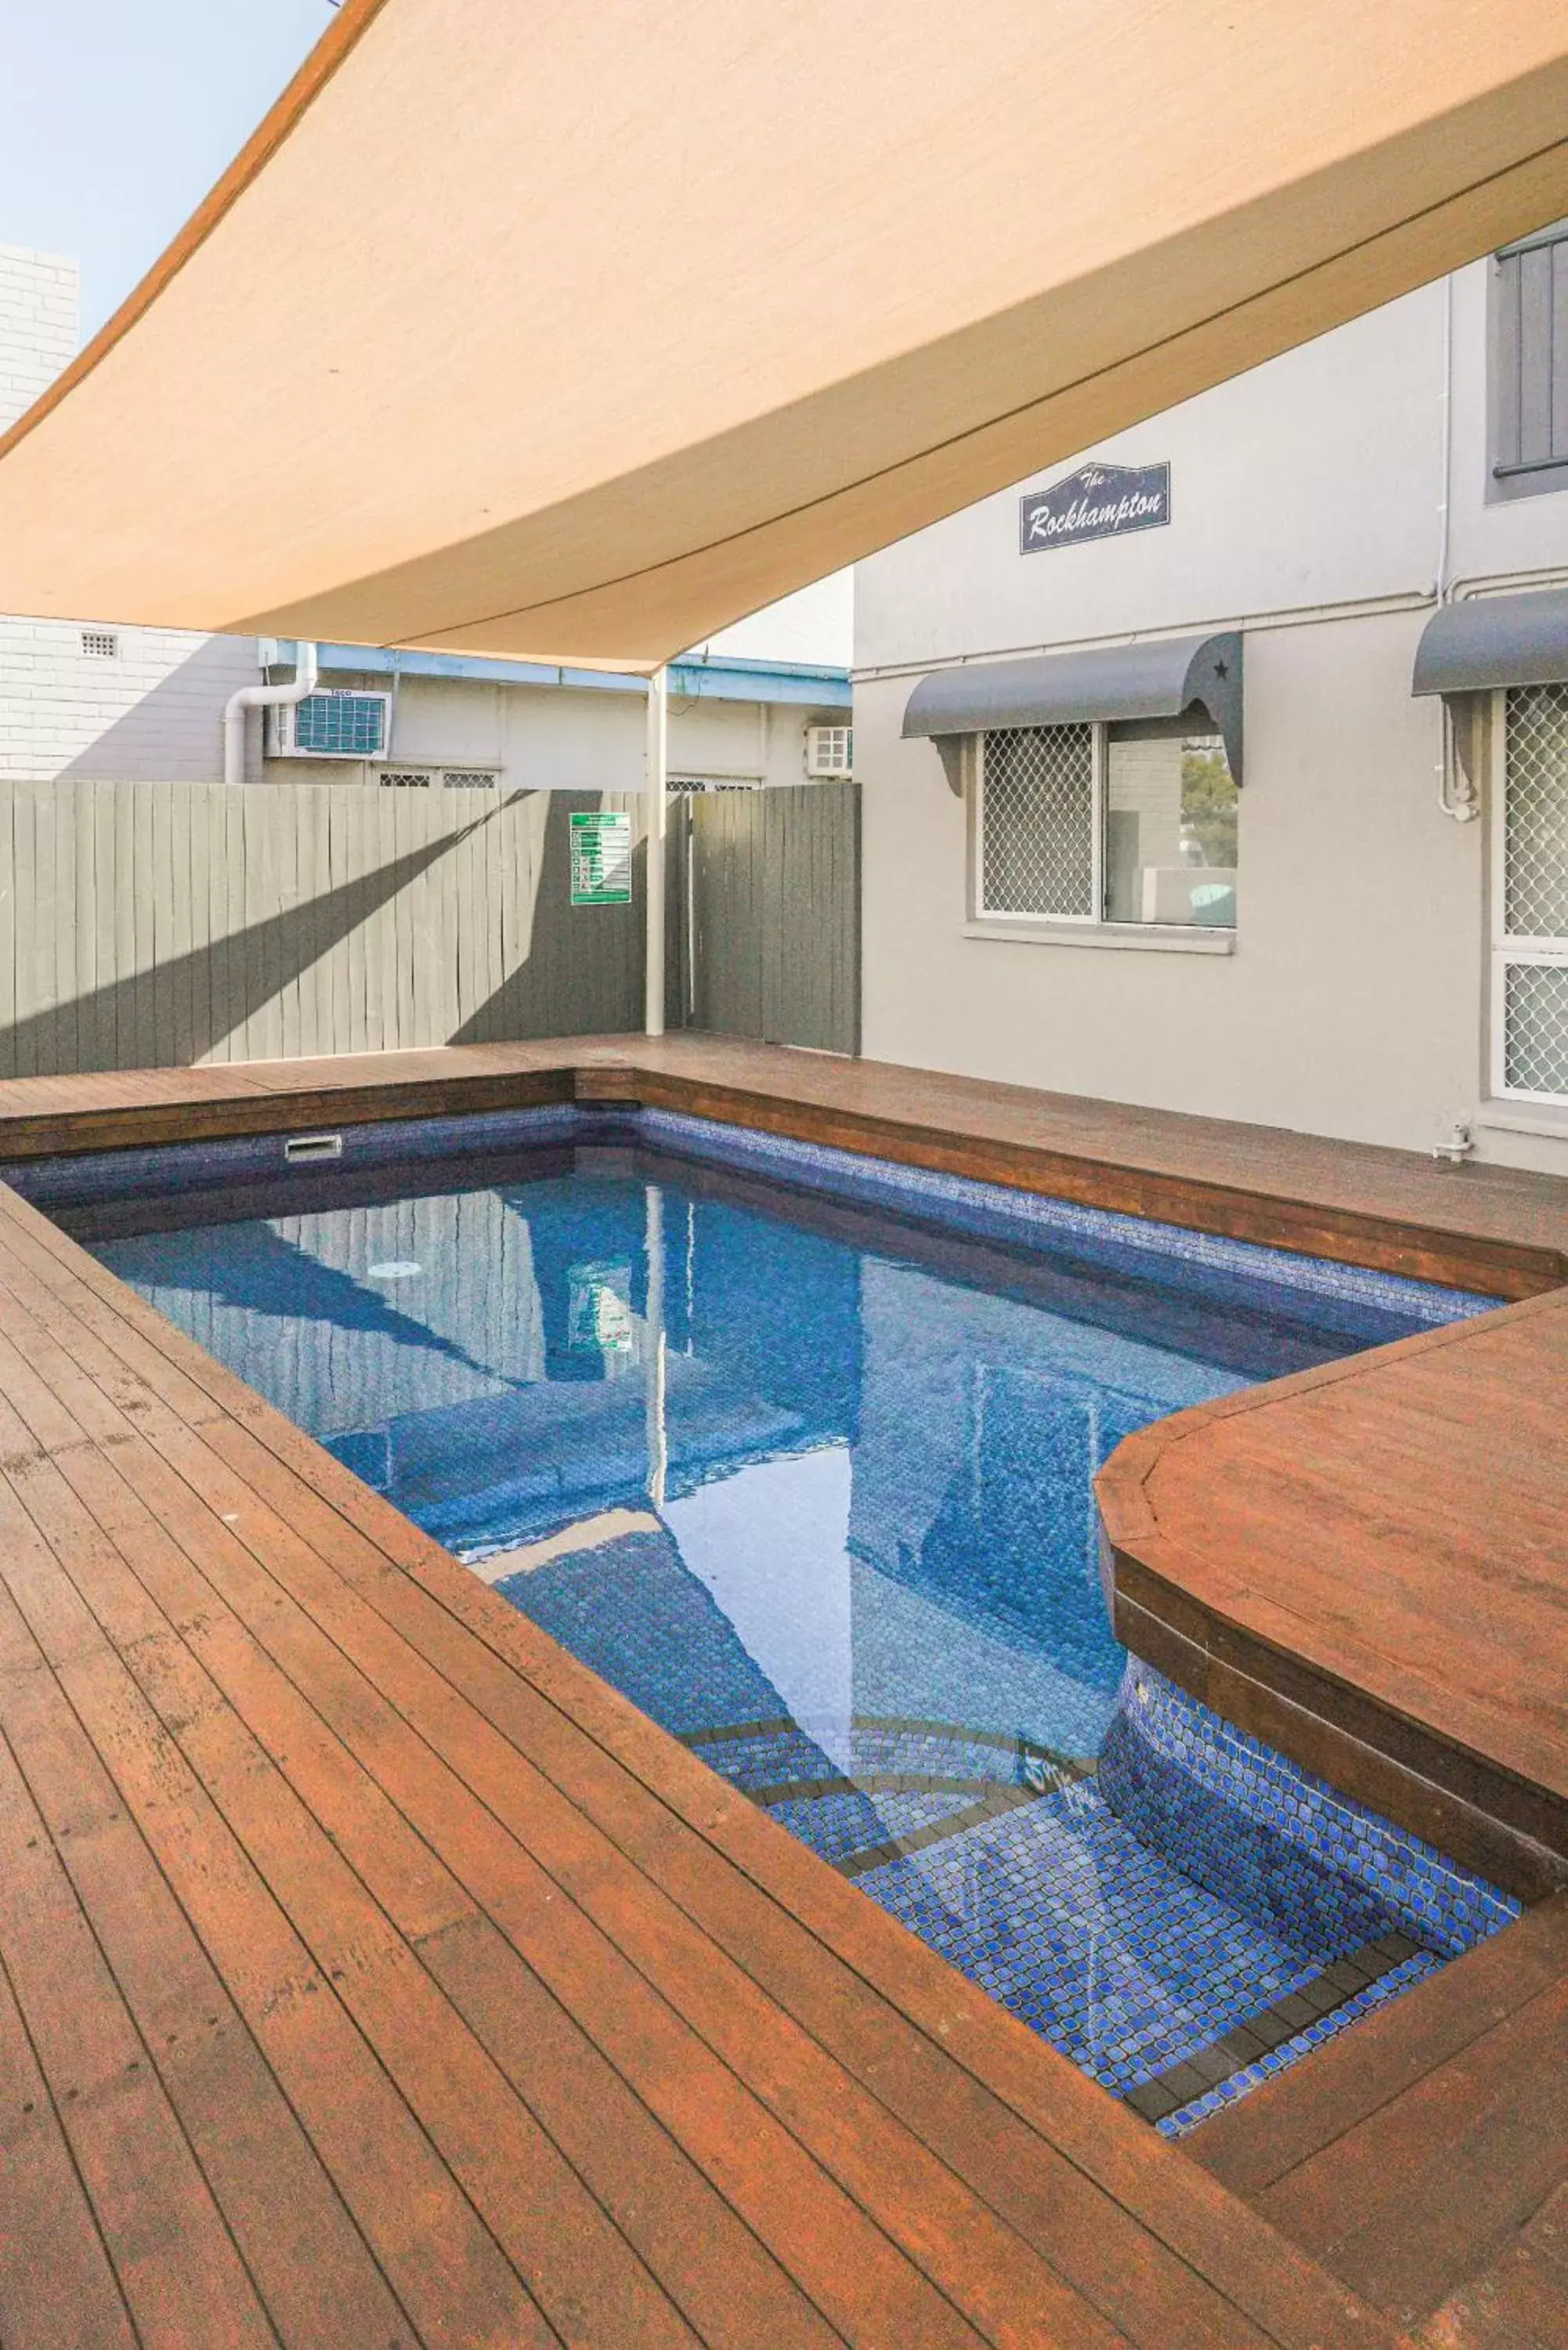 Property building, Swimming Pool in Rockhampton Serviced Apartments